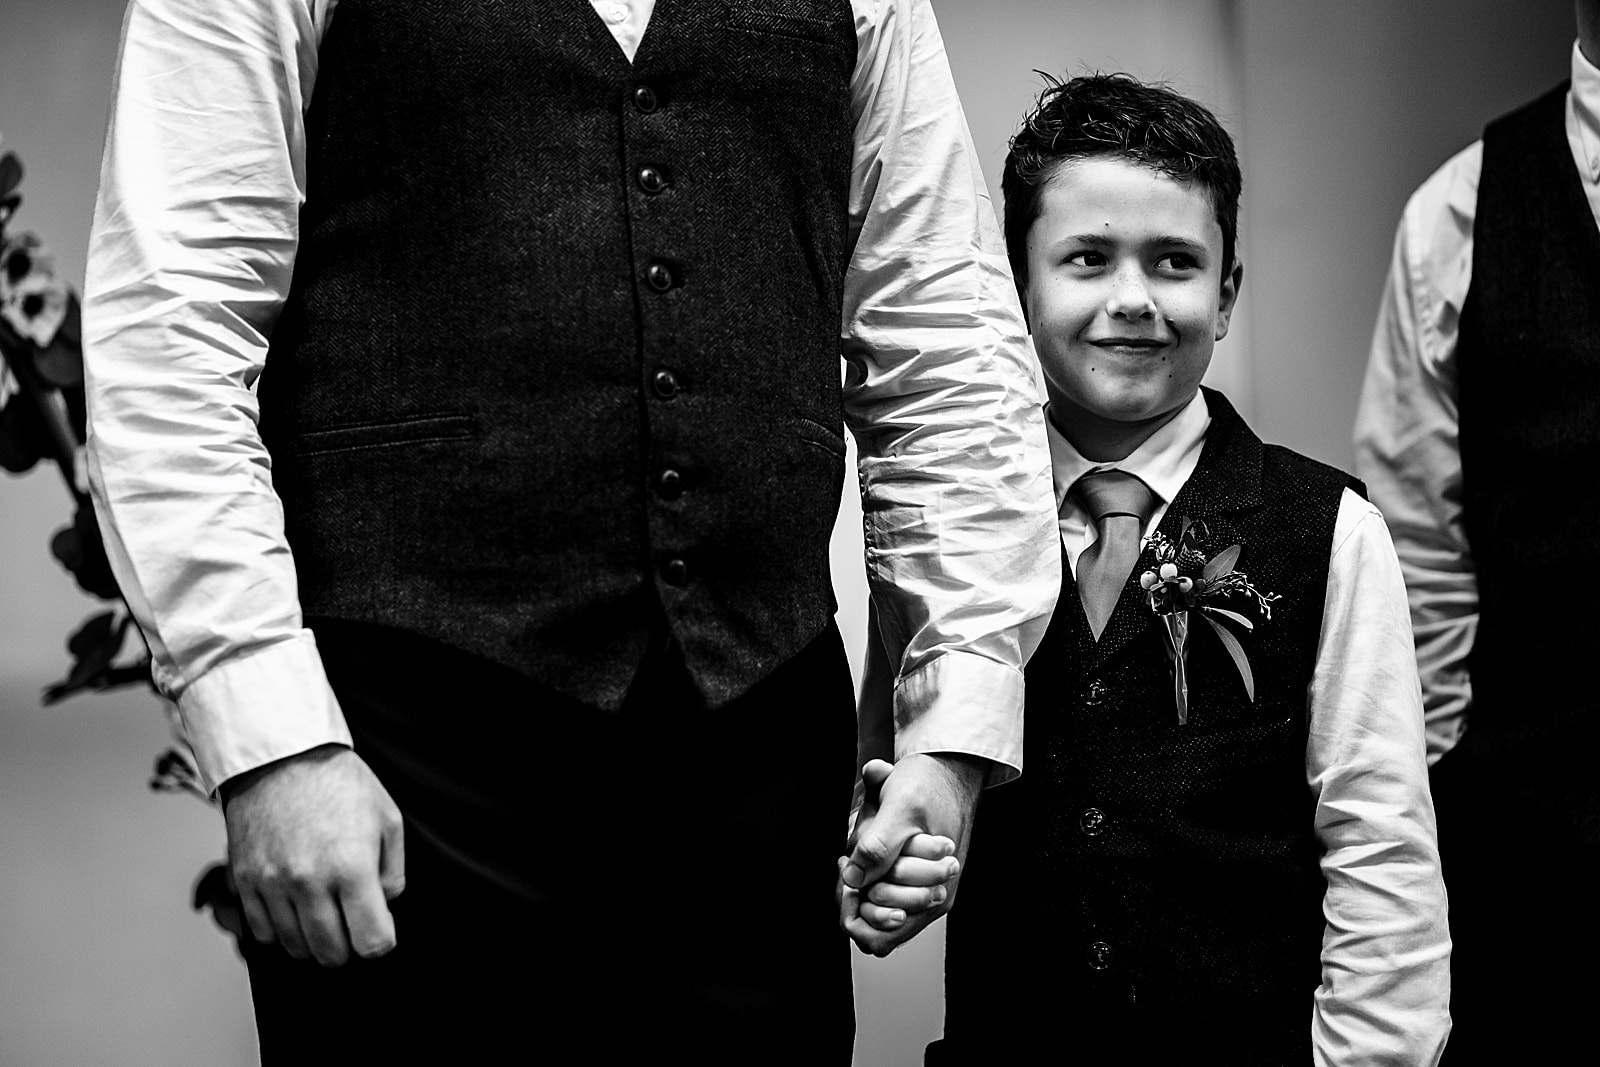 the groom's son smiles as the bride walks down the aisle